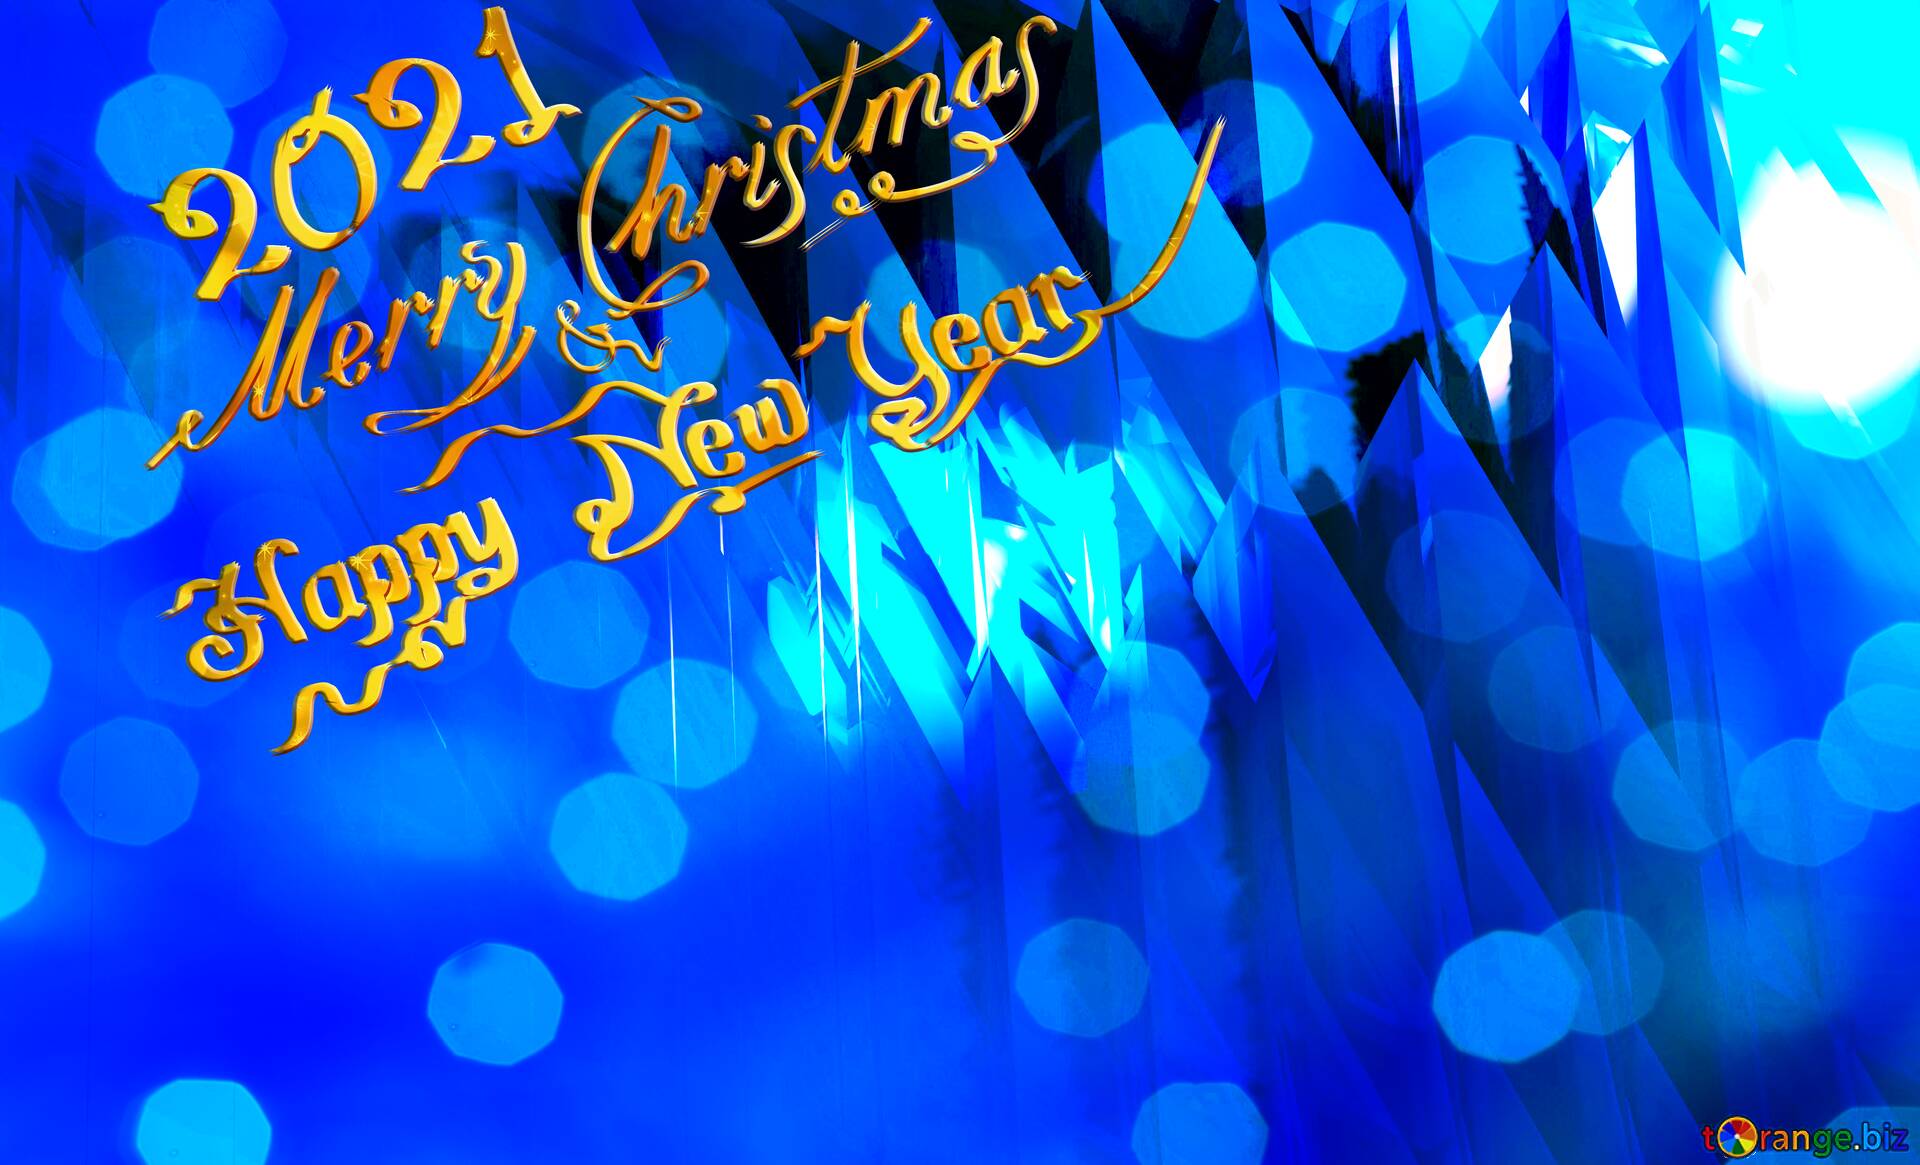 Download Free Picture Blue Futuristic Shape. Computer Generated Abstract Background. Happy New Year 2021 Card Background Merry Christmas On CC BY License Free Image Stock TOrange.biz Fx №183267